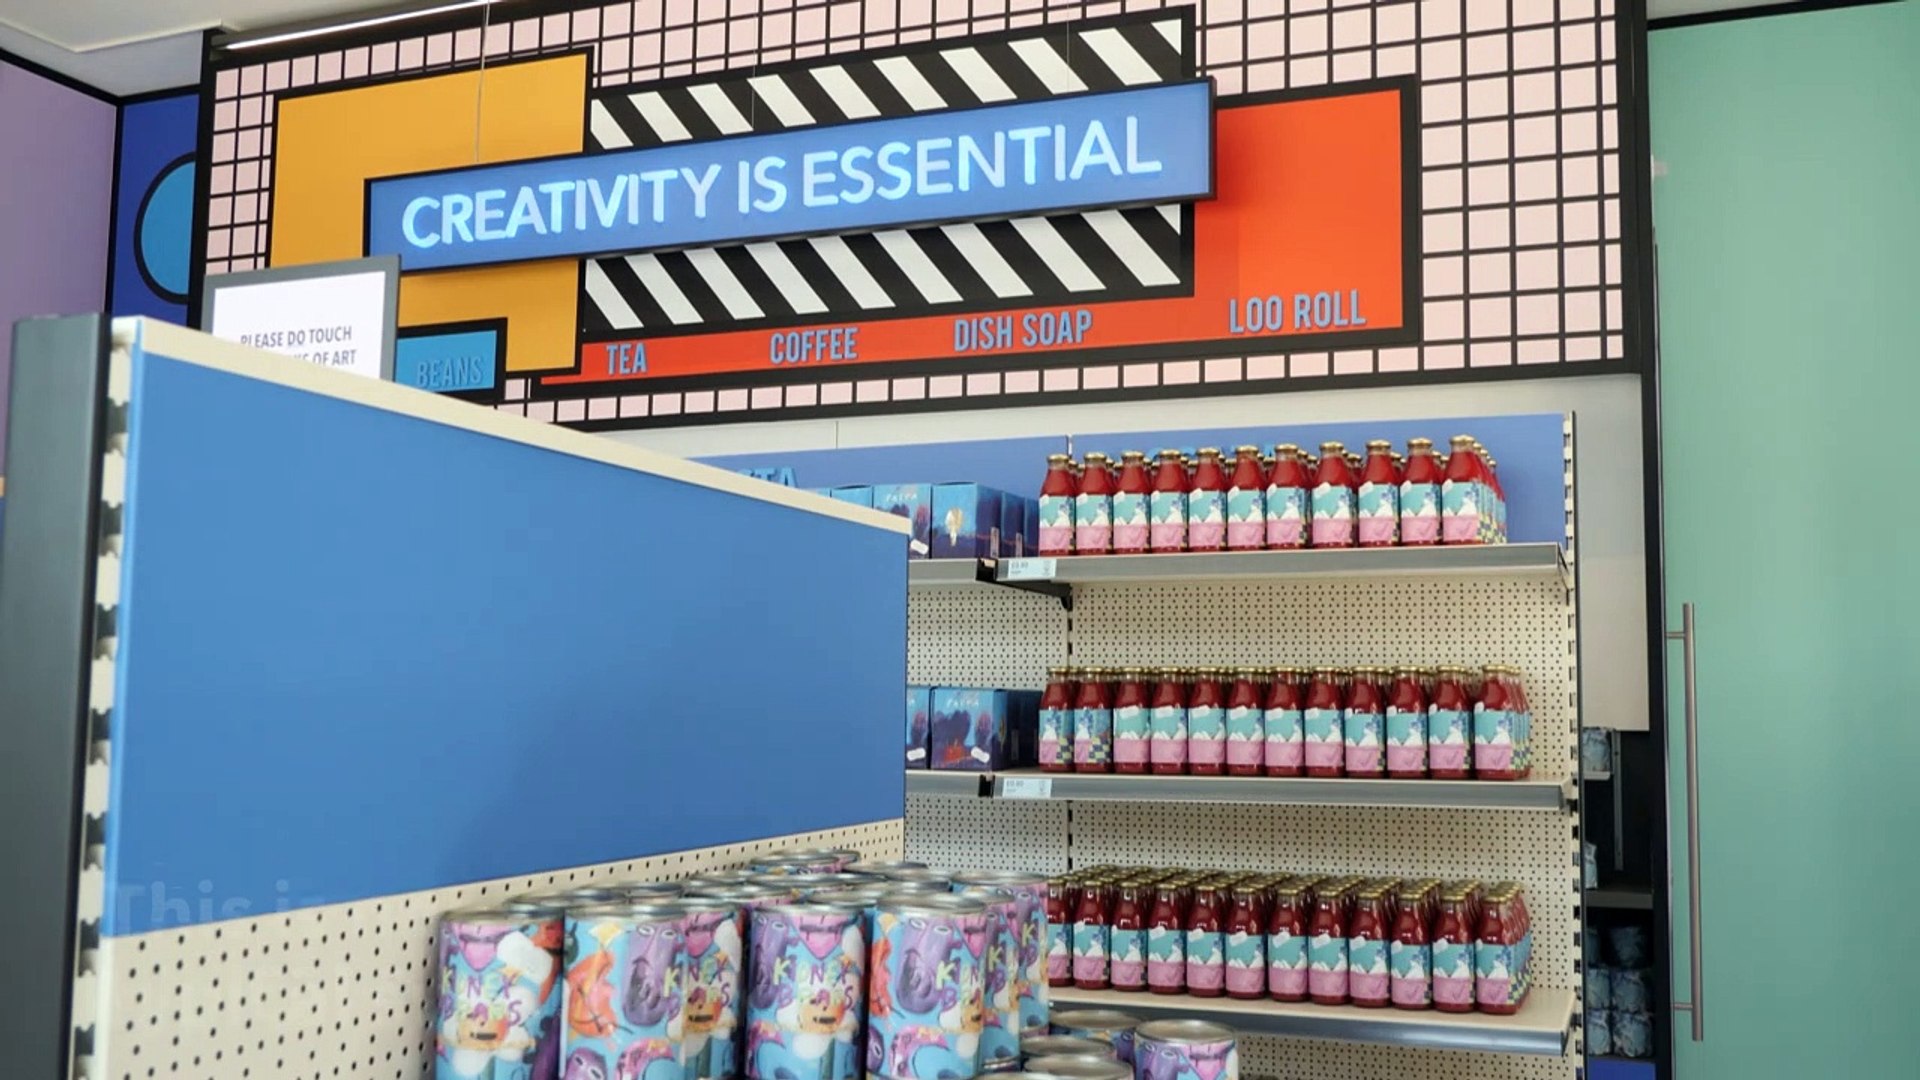 Creativity is essential': Restrictions-defying supermarket at London Design  museum - Vidéo Dailymotion